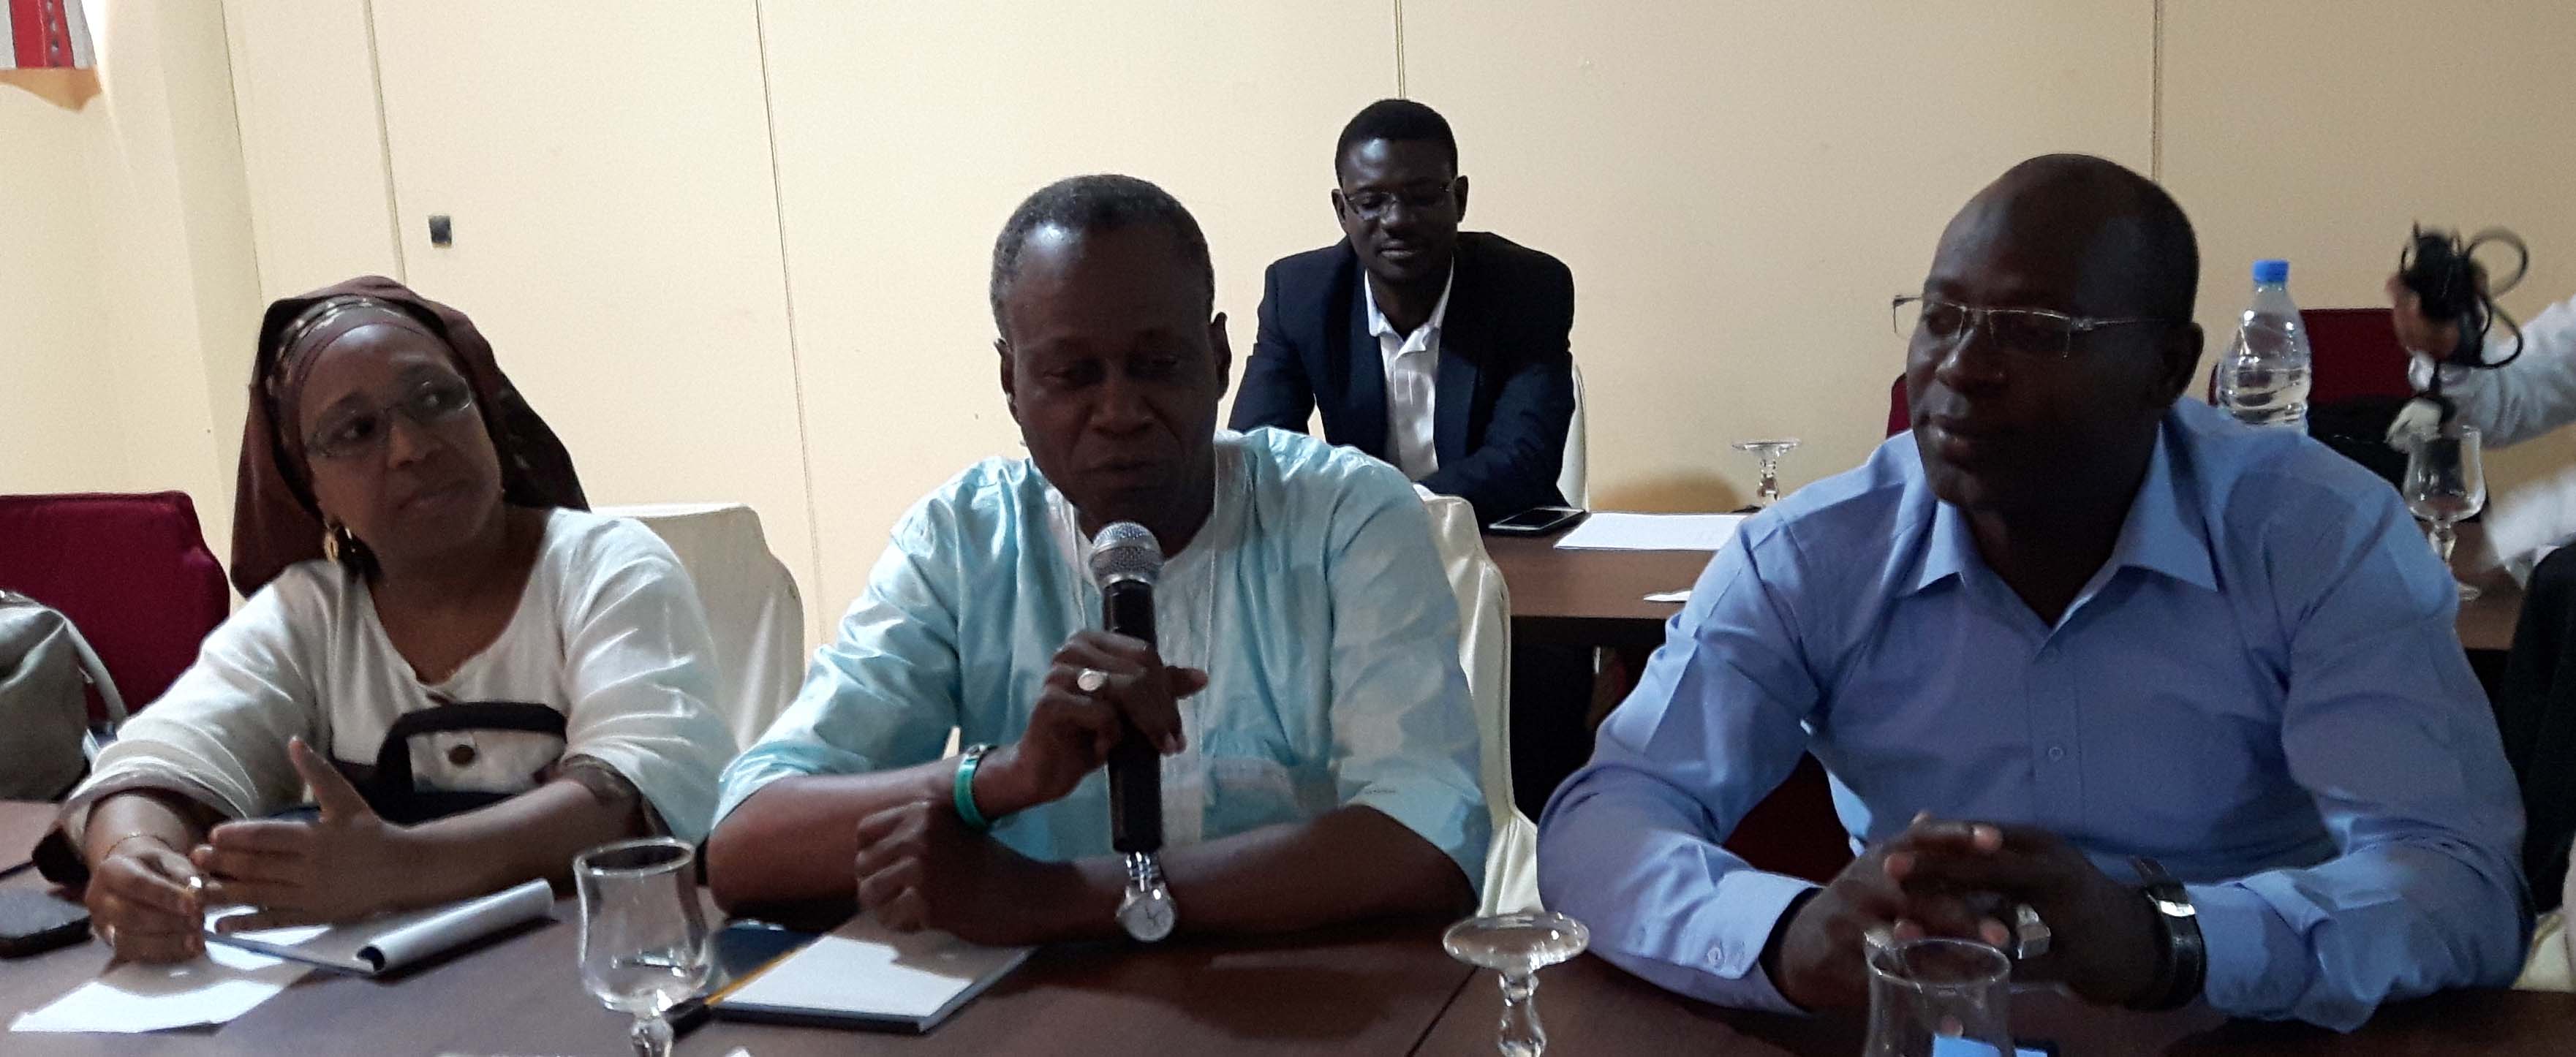 The SHOPS Plus team in Senegal presented its upcoming activities to the Senegalese Ministry of Health and Social Action, USAID/Senegal, and the Private Sector Health Alliance in September 2016. 